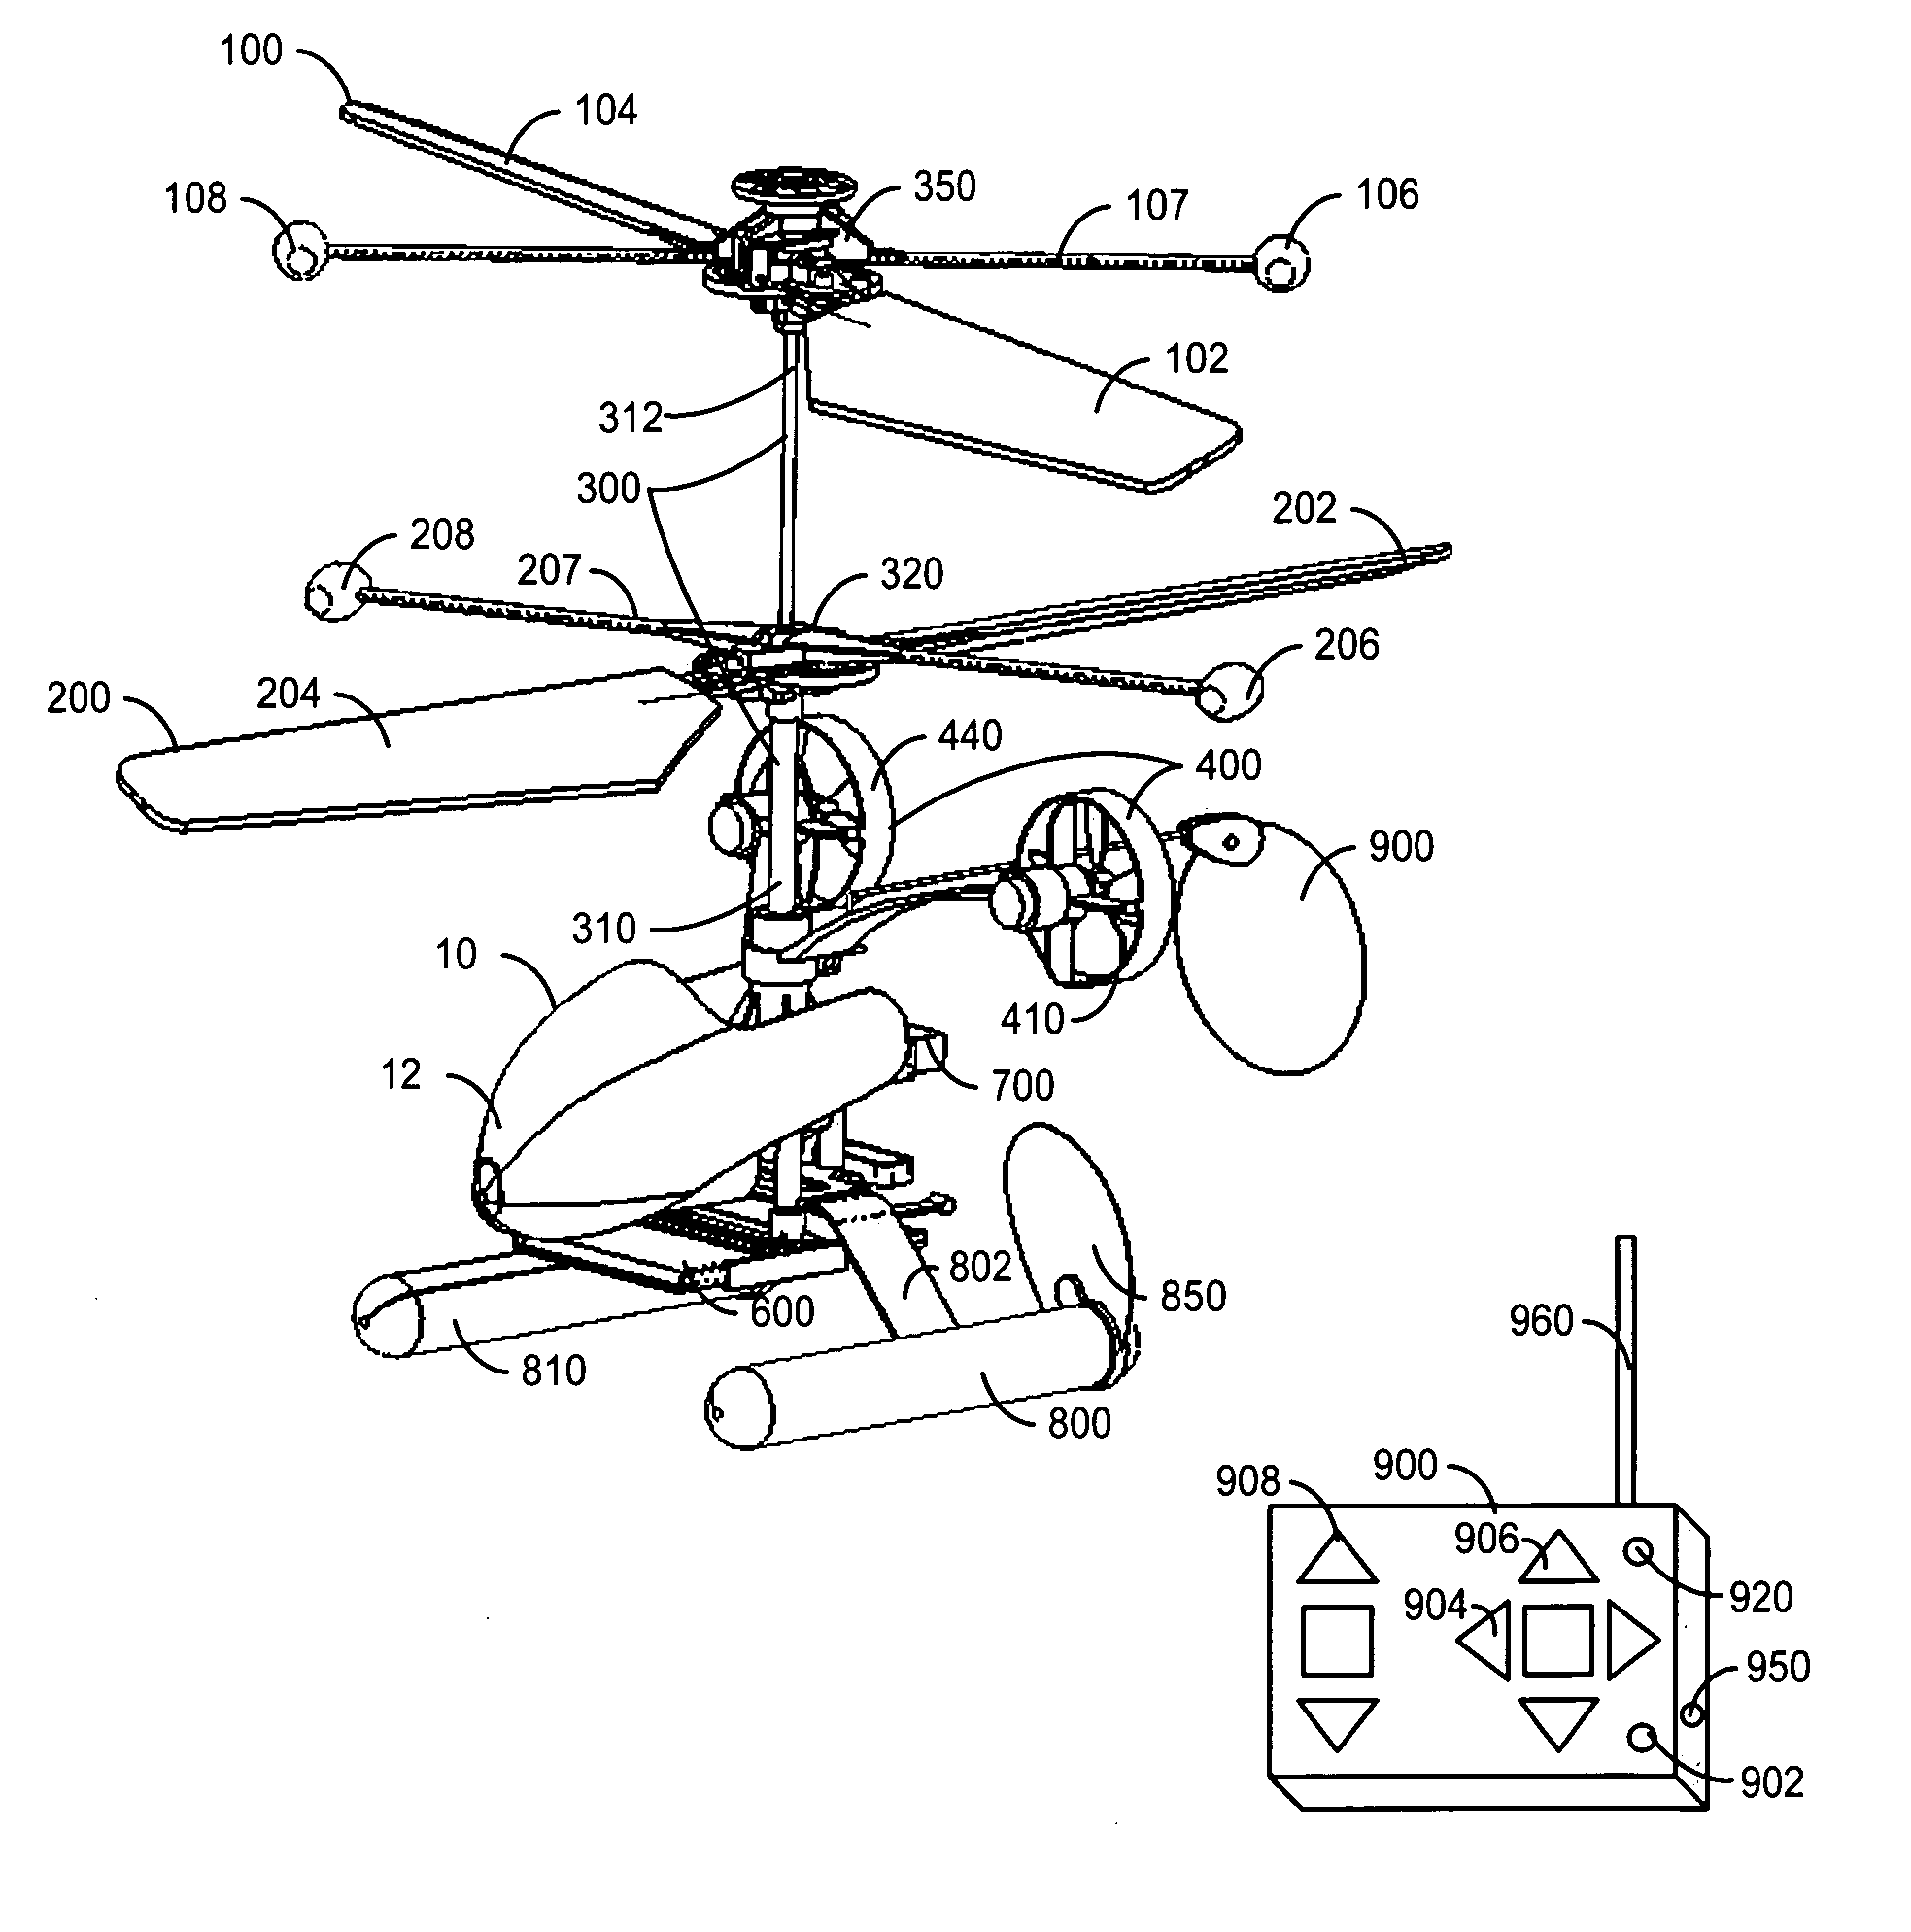 Rotary-wing vehicle system and methods patent